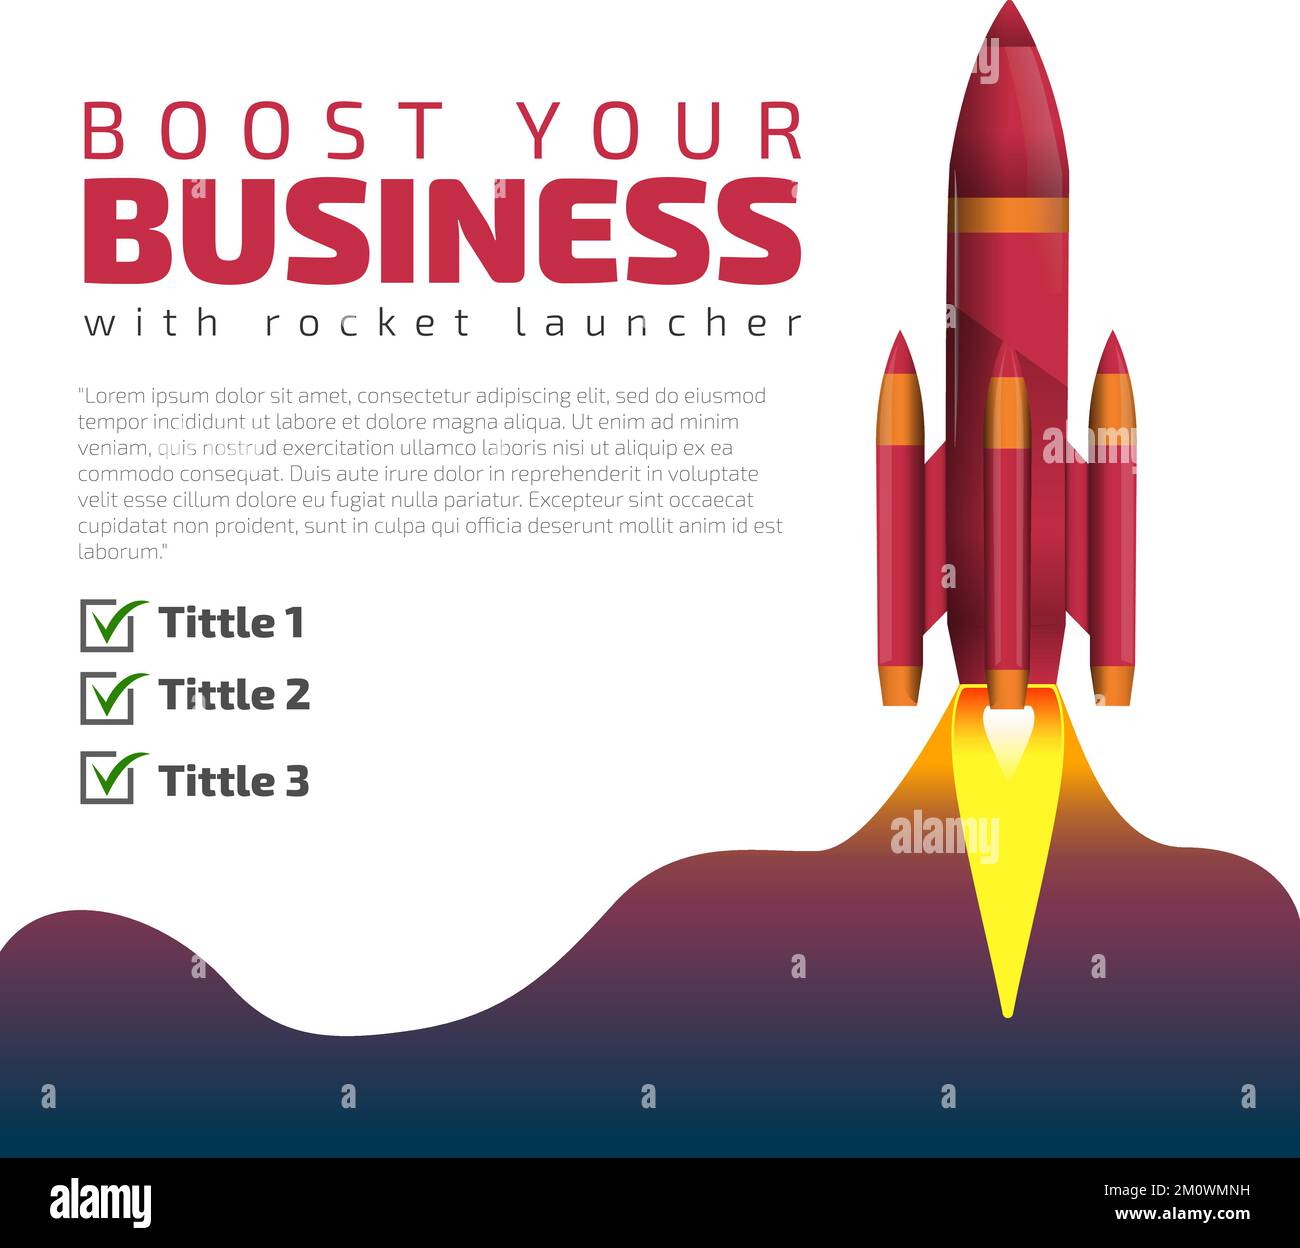 Boost Your Brand Rocket Launcher Poster Suitable For Feed Marketing, Content Creator, Boost Business Success. Stock Vector